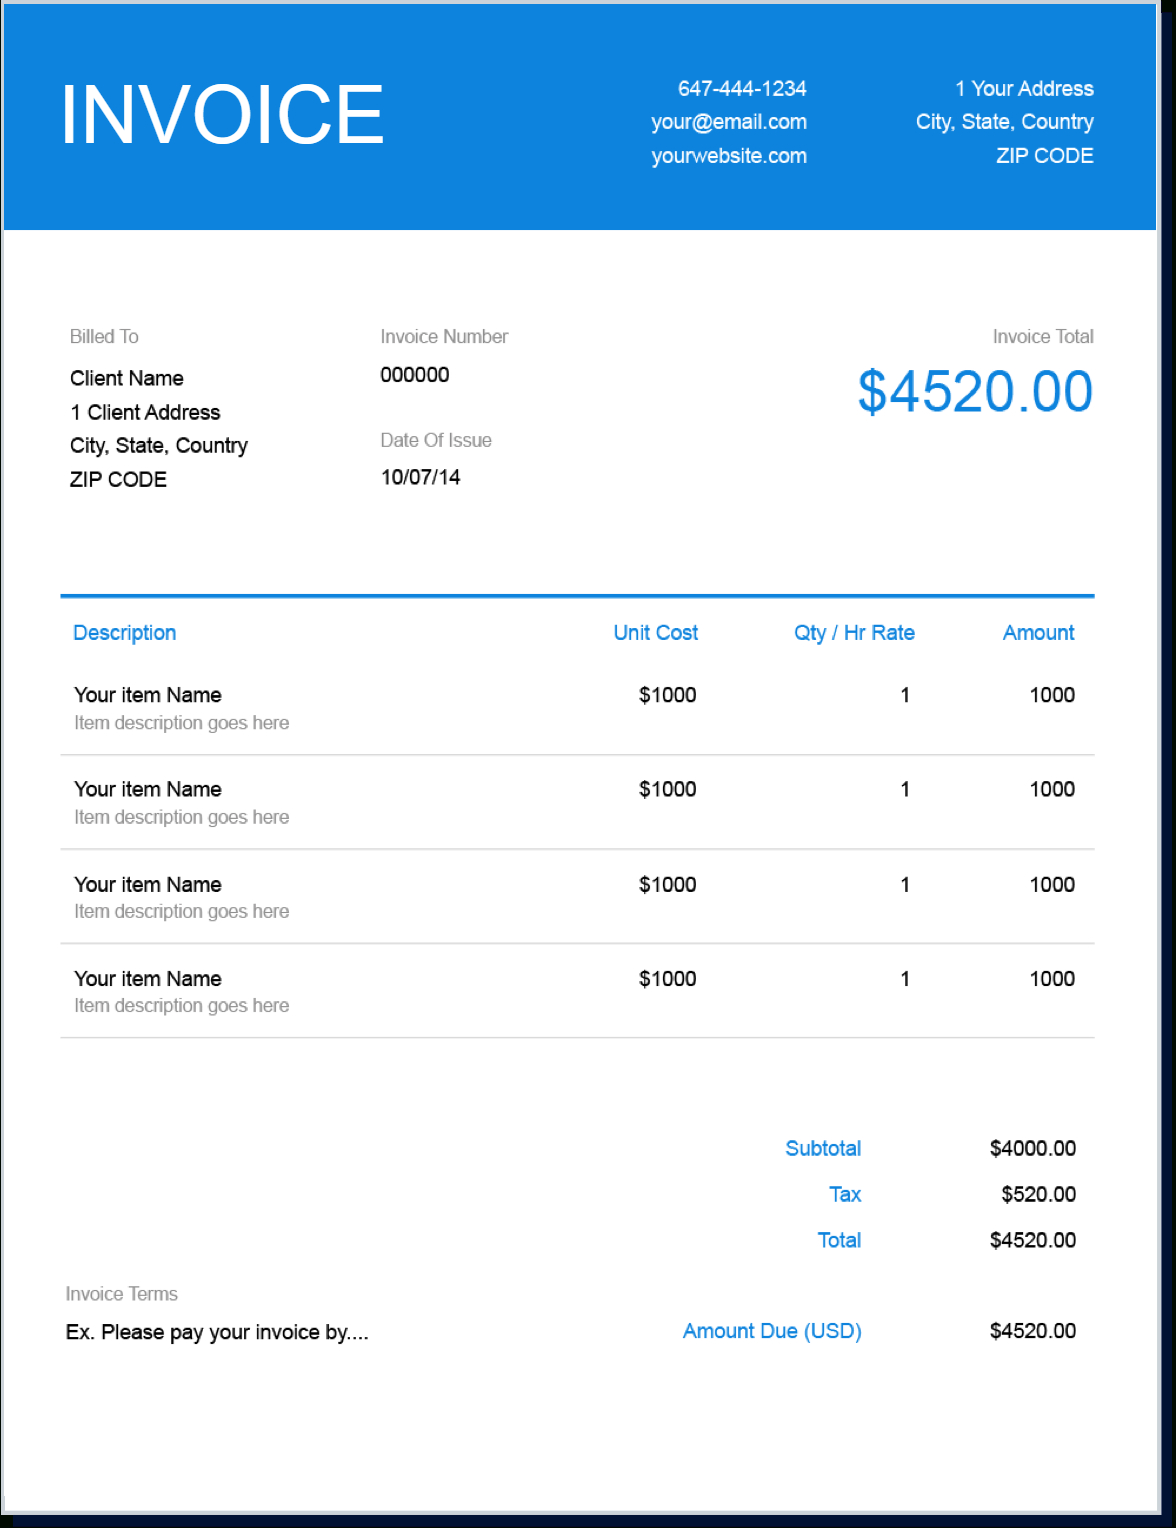 Invoice Template | Create And Send Free Invoices Instantly Pertaining To Free Invoice Template Word Mac